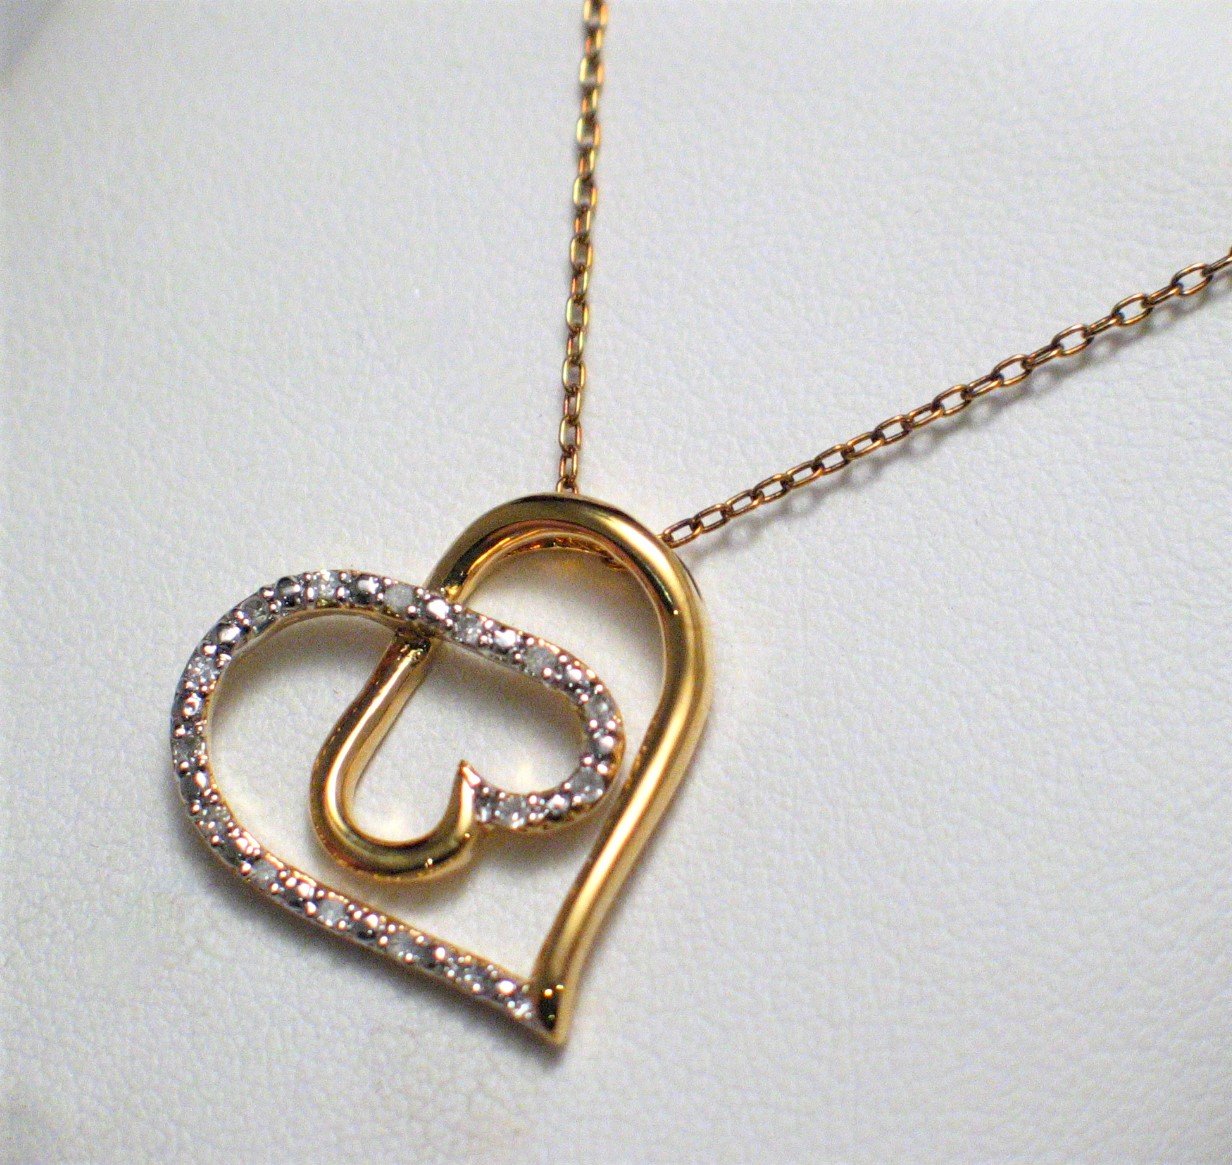 Heart Necklace, Gold Sterling Silver 17.5" Diamond Heart Pendant Necklace - Jewelry